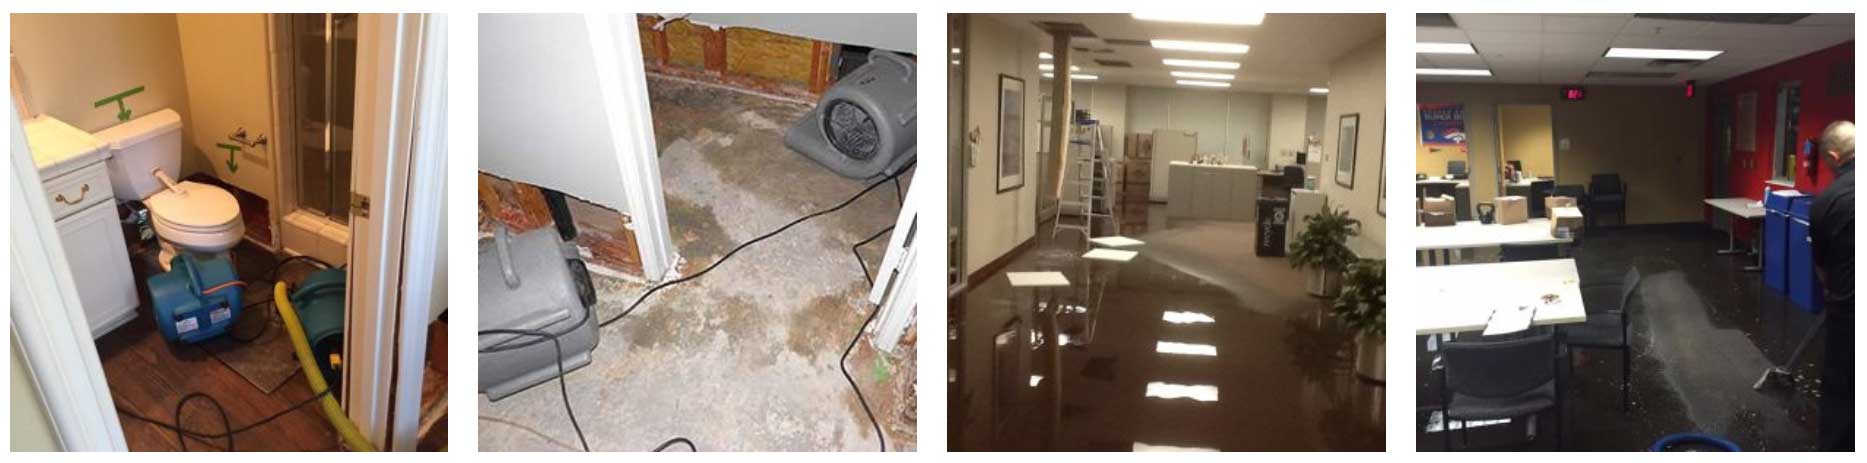 Water Damage Clean Up in Covina, CA